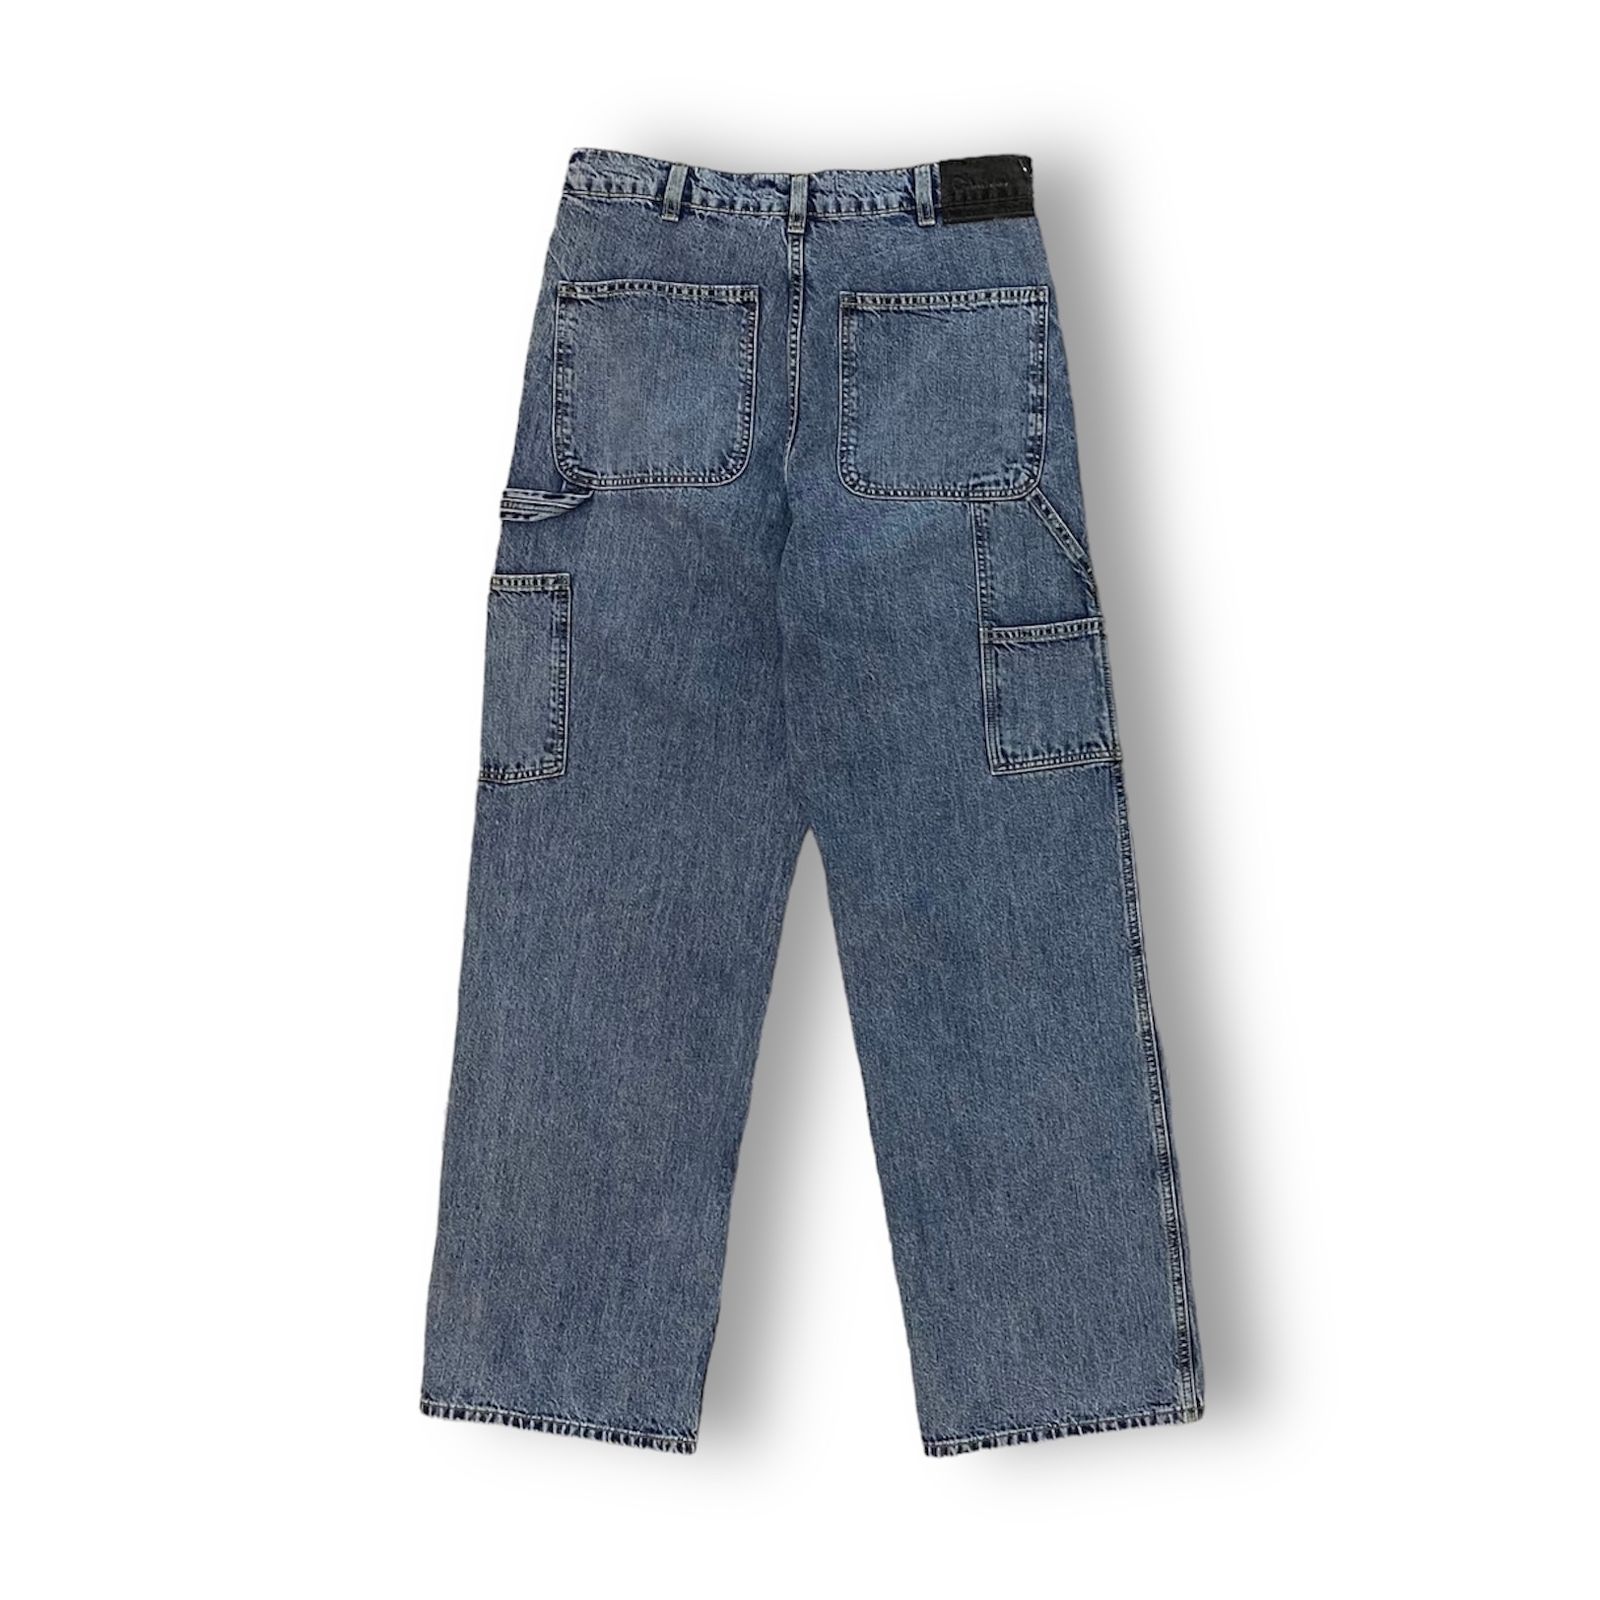 OUR LEGACY - JOINER TROUSER /SHADOW WASH DENIM 